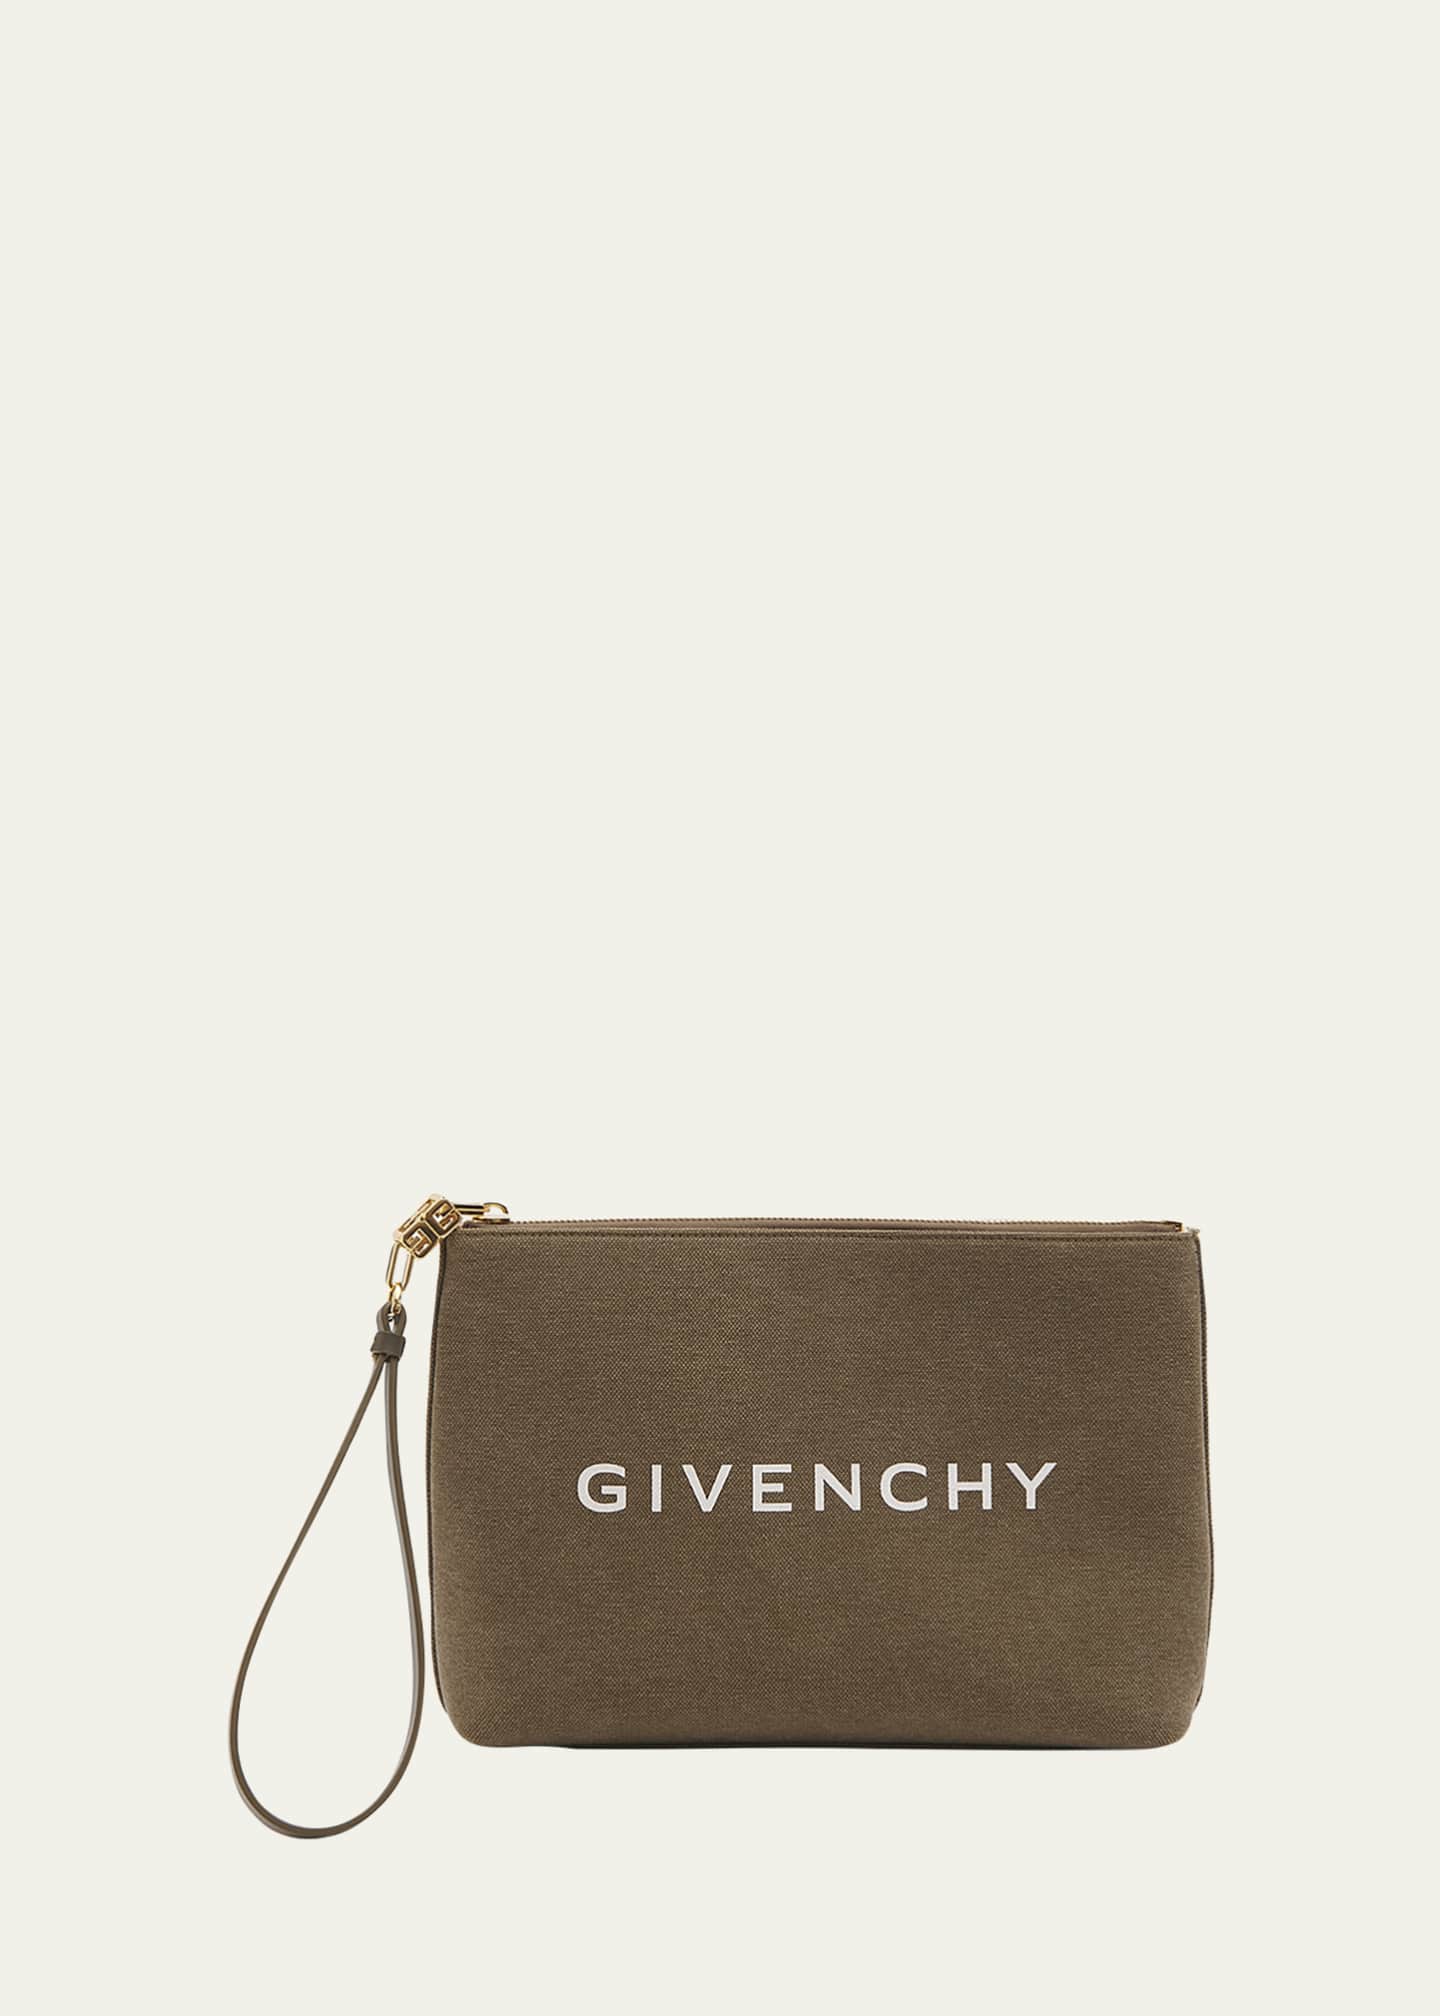 Givenchy Large Pouch Wristlet in Washed Canvas - Bergdorf Goodman